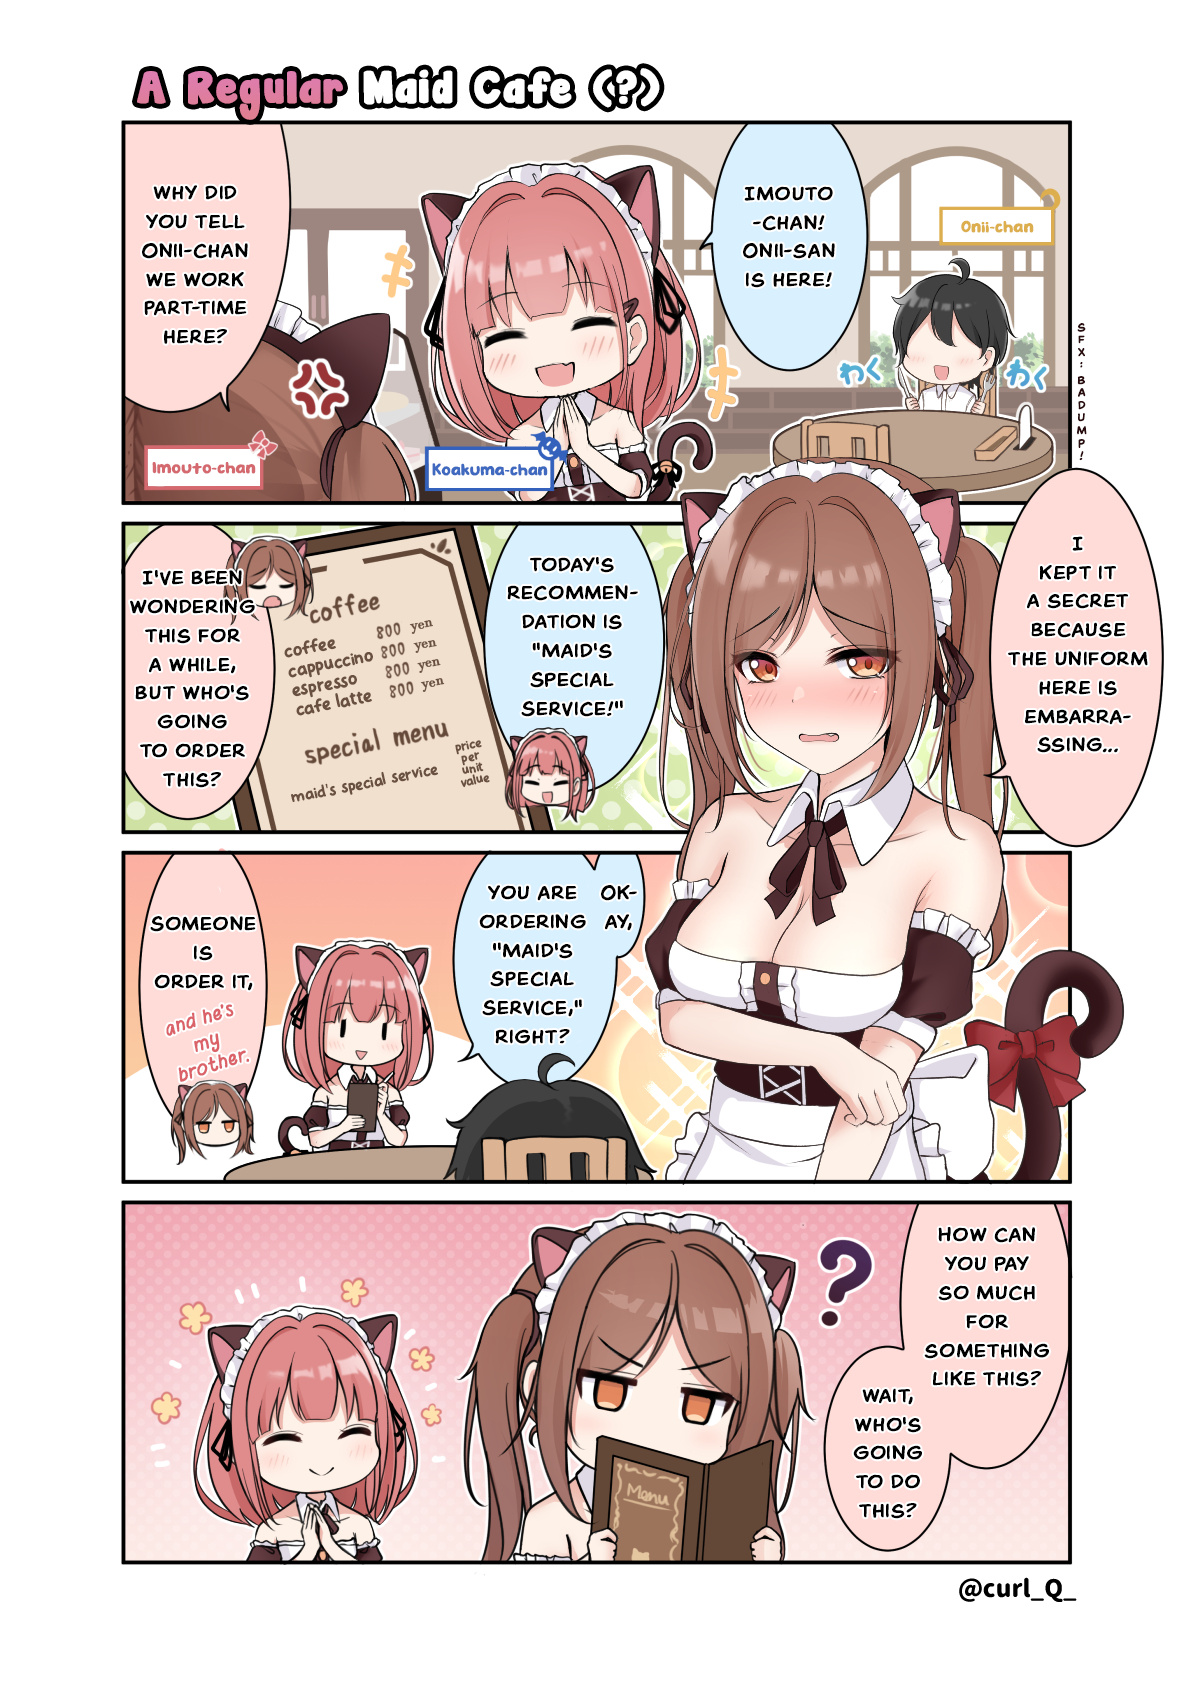 Namaiki Imouto-Chan Vol.2 Chapter 7.1: A Regular Maid Cafe (?) - Picture 2